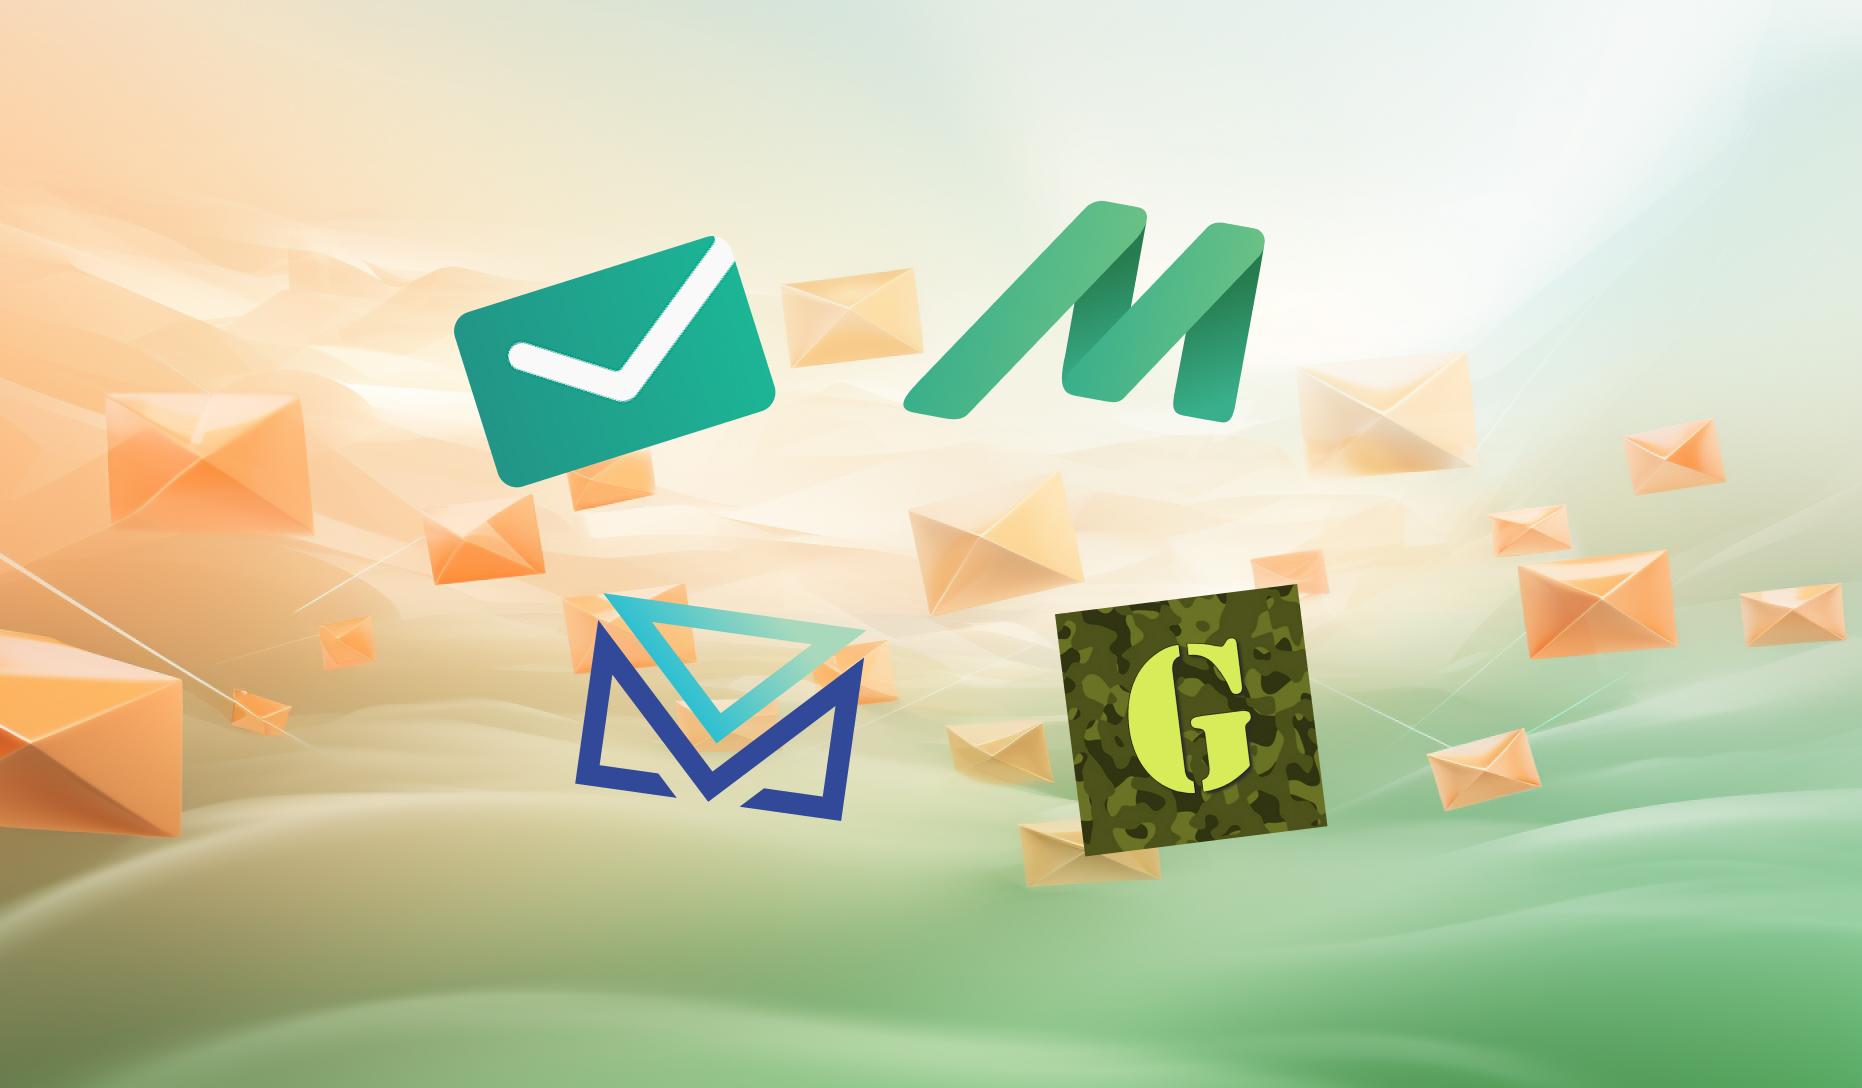 Unlock the potential of disposable email APIs for your projects. This guide offers a detailed comparison of the top mail providers to help you select the perfect service for development, testing, and privacy applications.